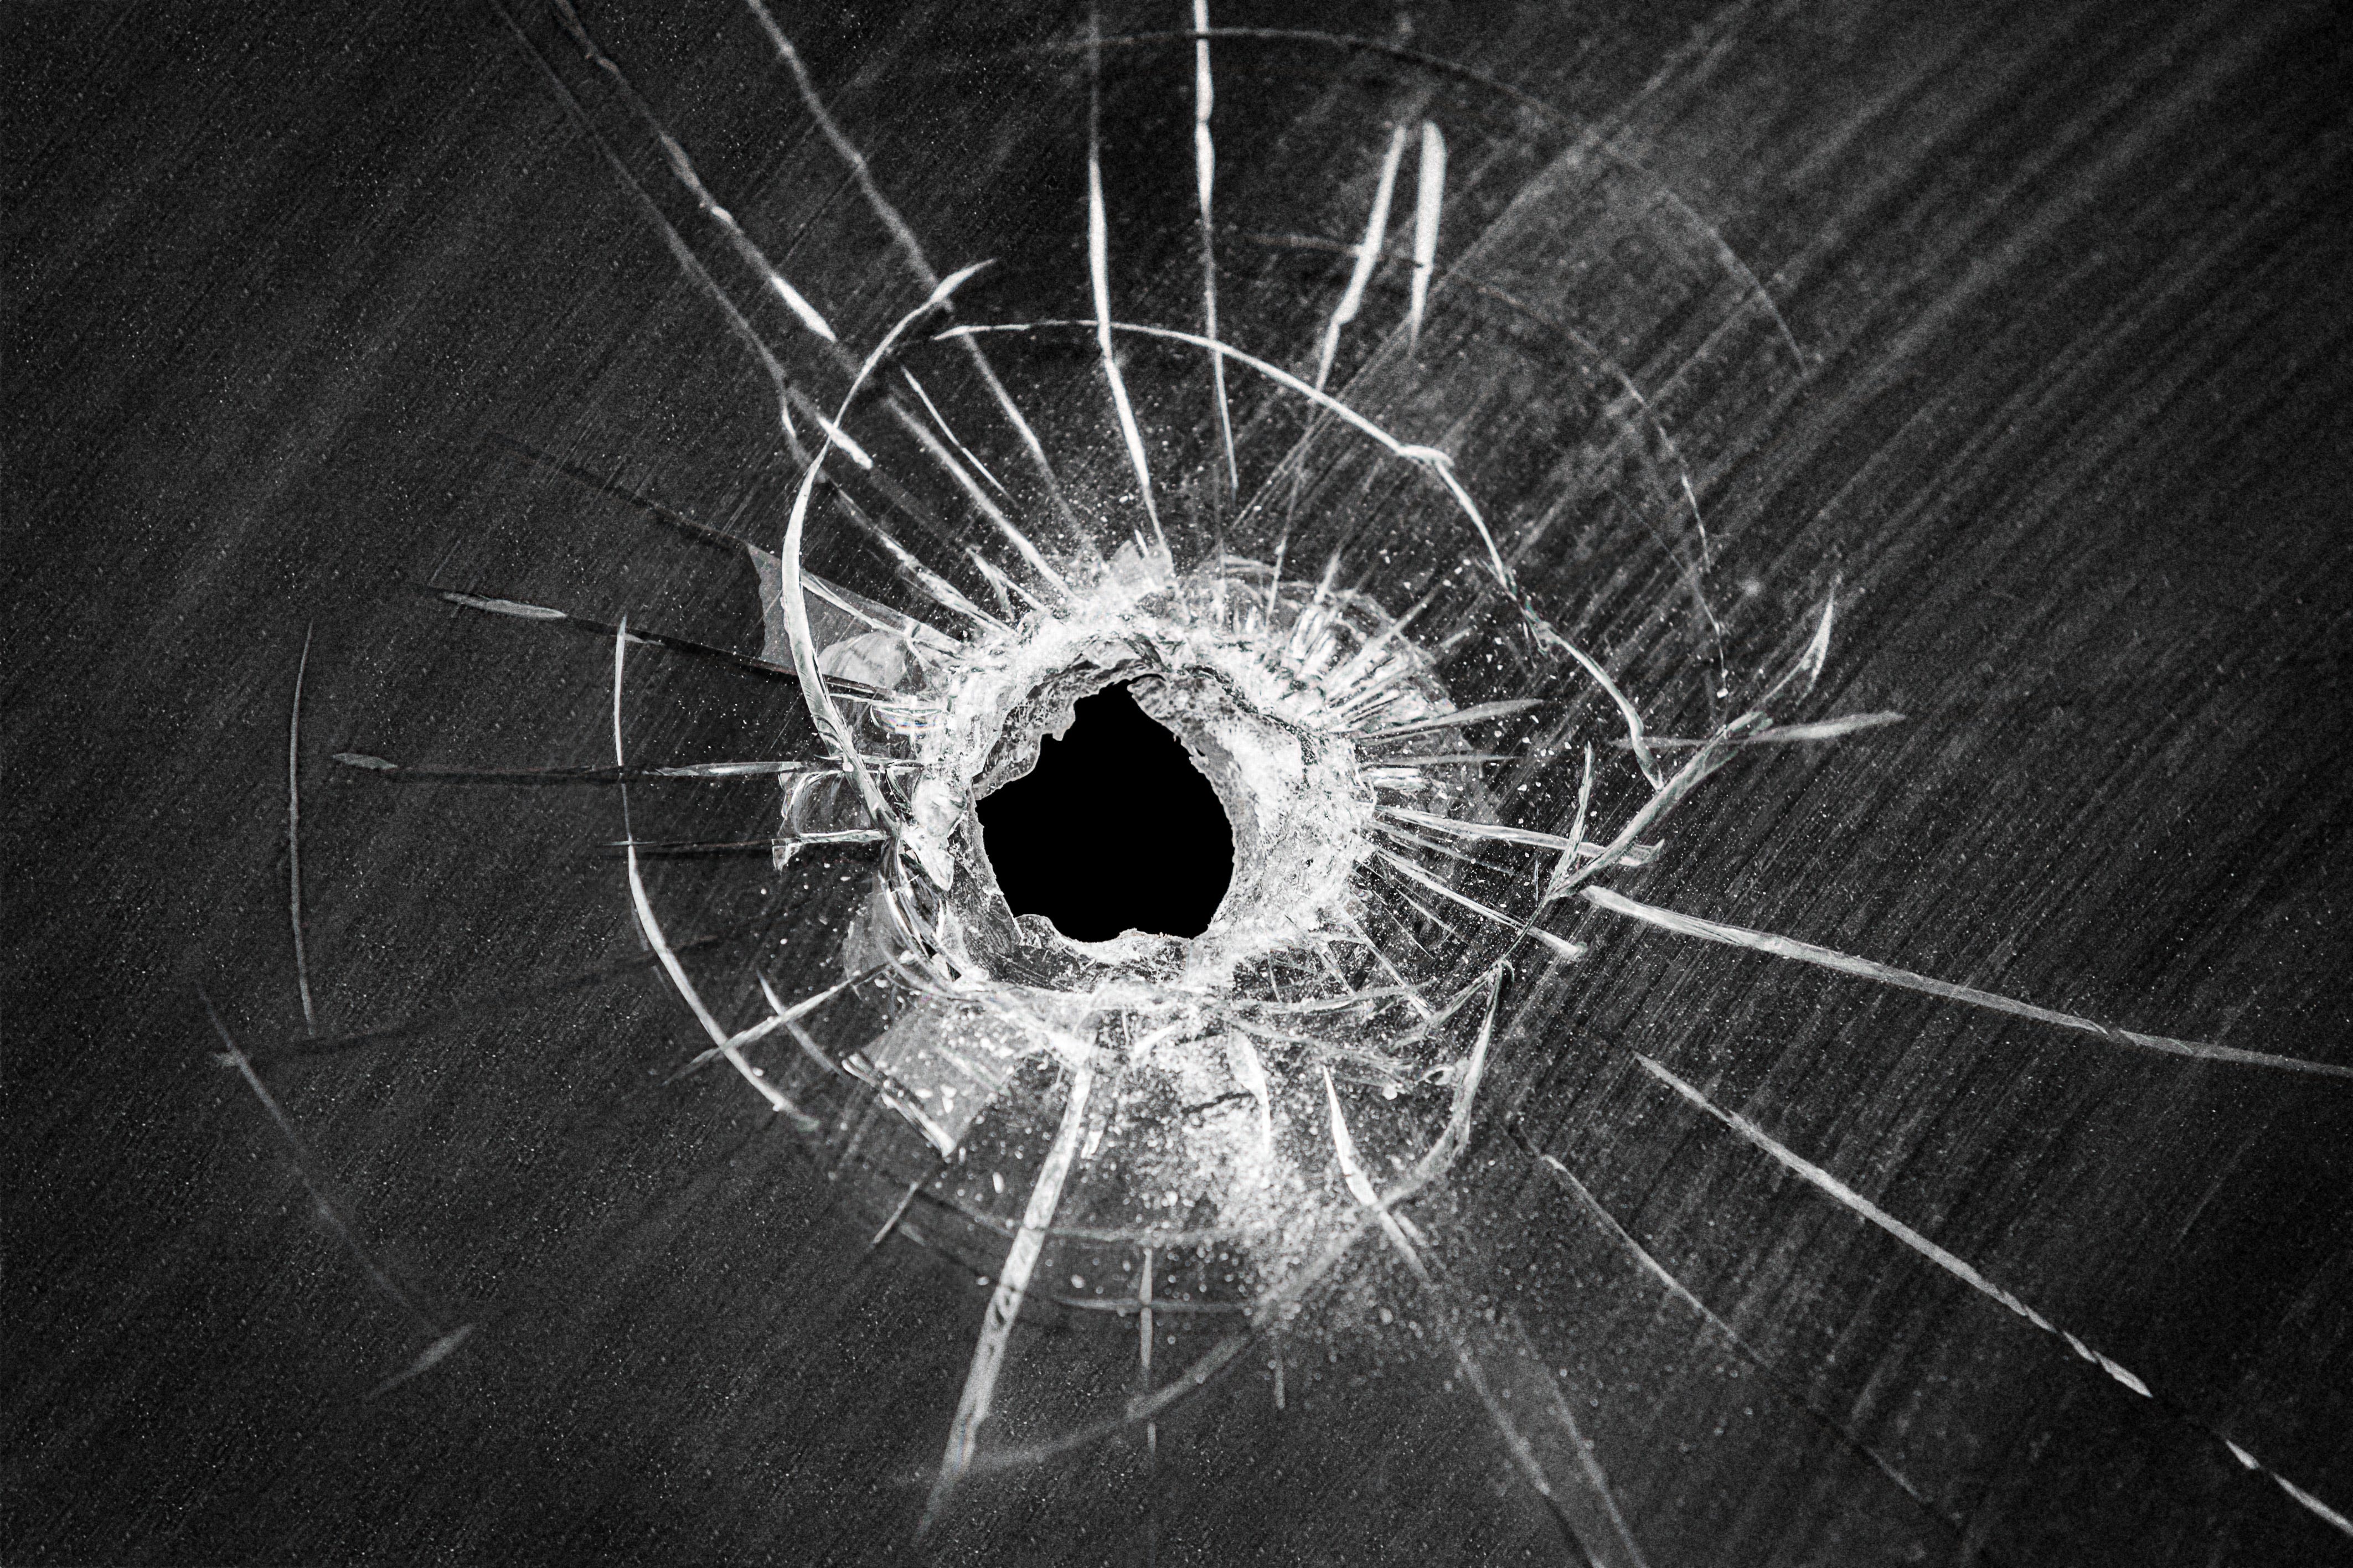 Mysterious bullet hole found in baby's room